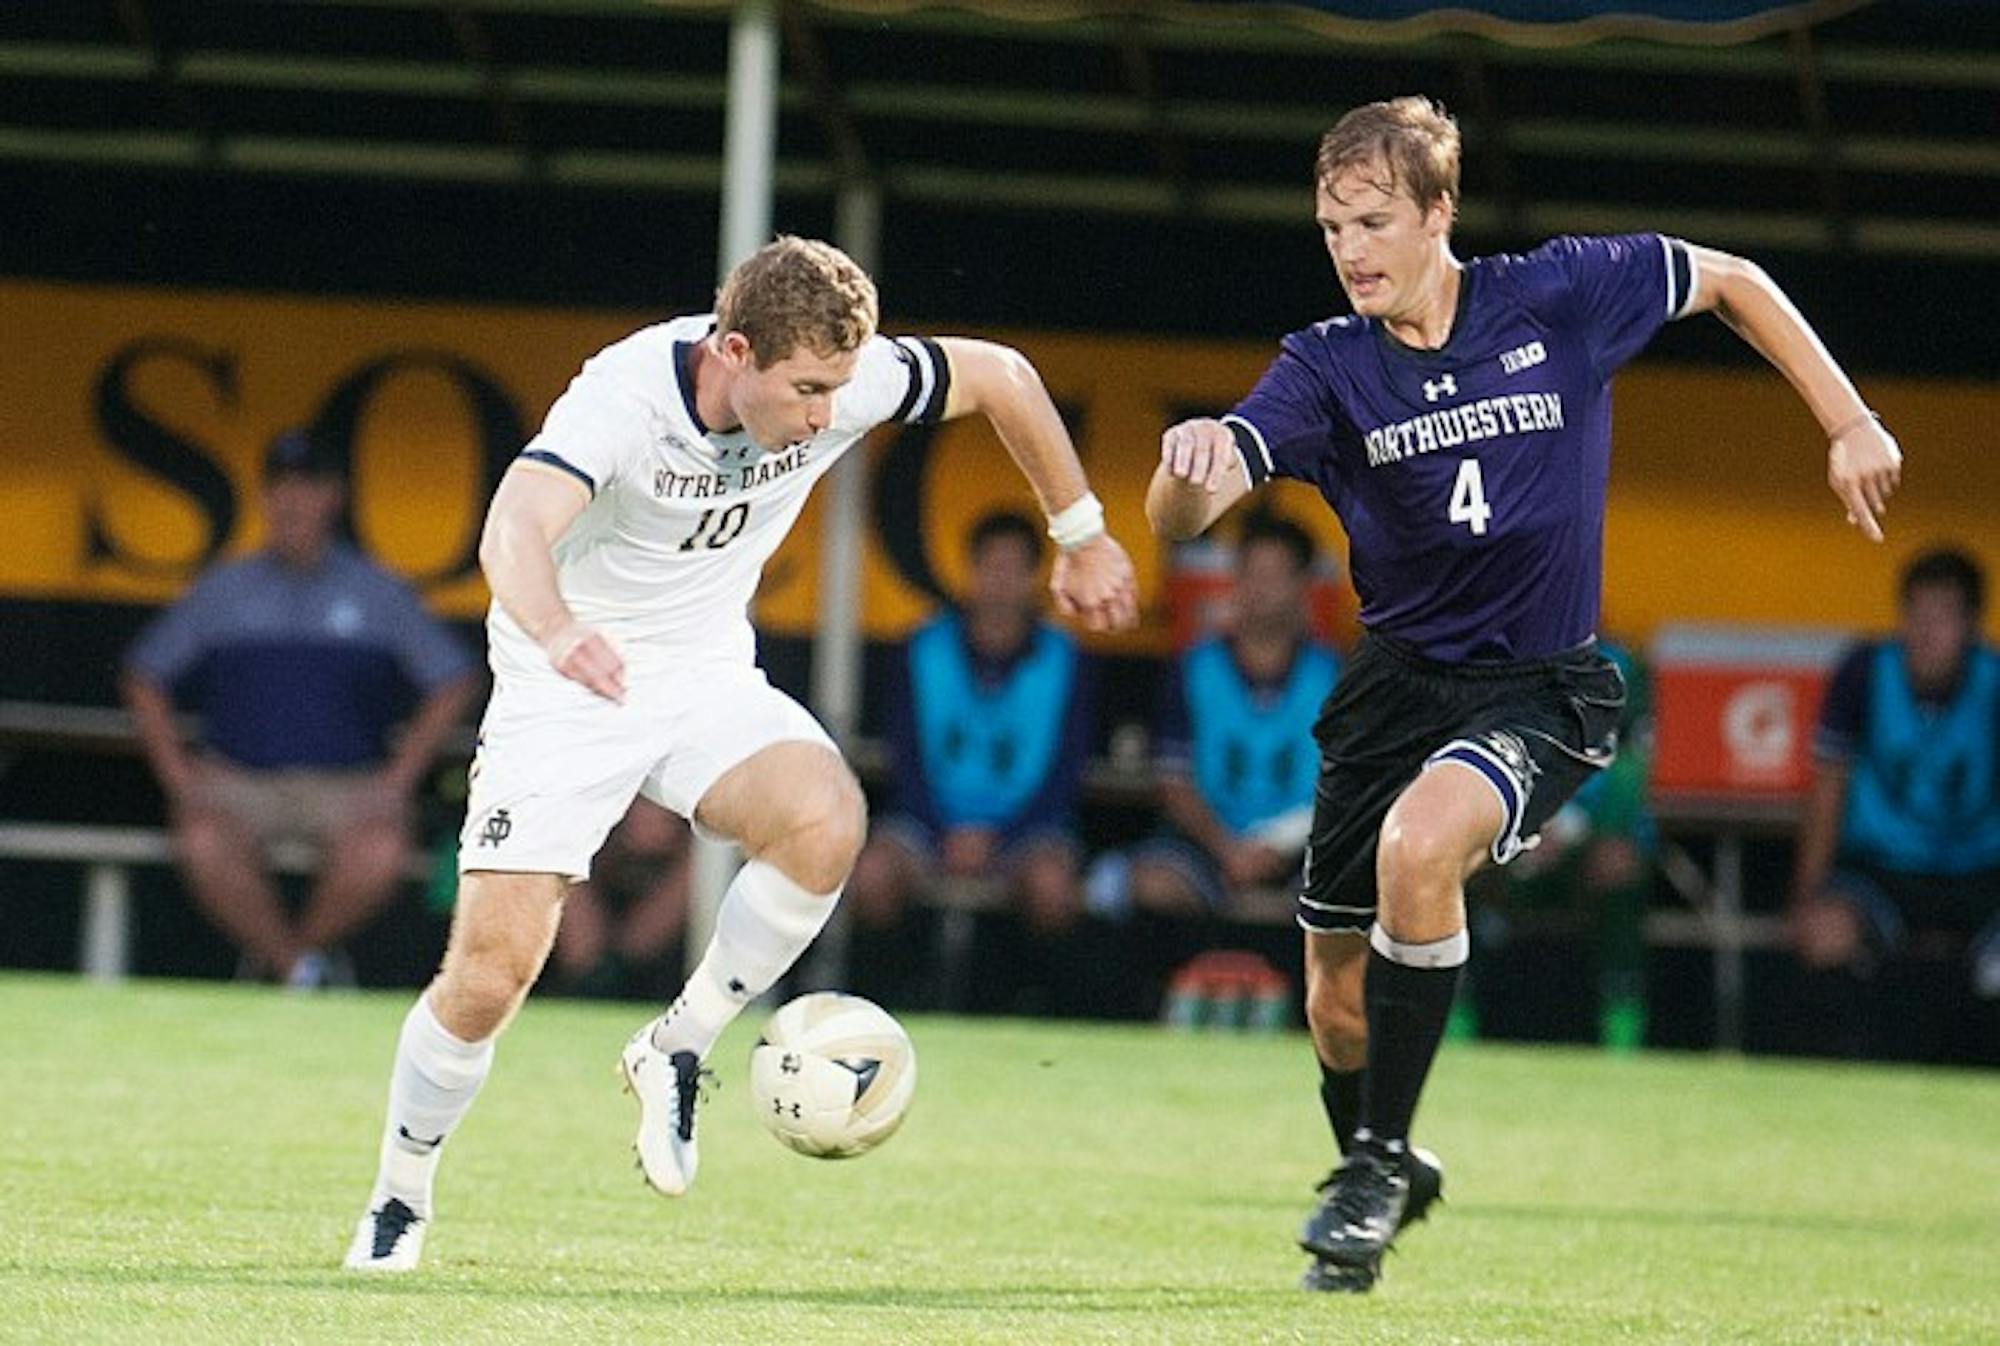 Irish senior forward Jon Gallagher evades a defender during Notre Dame's 2-1 overtime win over Northwestern on Oct. 3 at Alumni Stadium. The tri-captain scored the winning goal in overtime for the Irish.